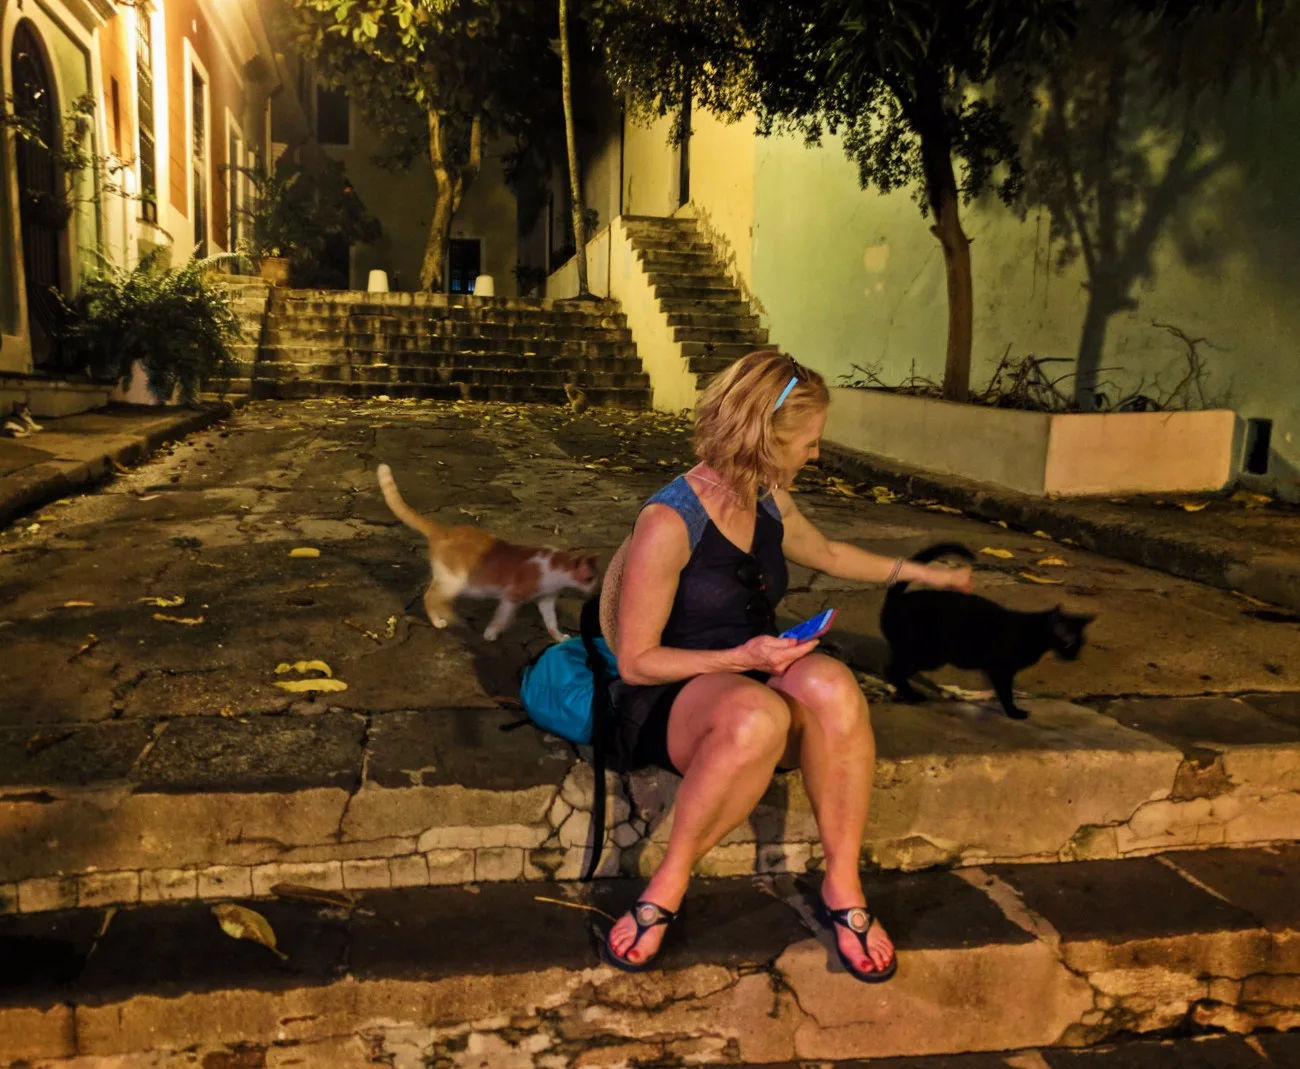 Maureen with Cats on Callejon Hospital in Old San Juan Puerto Rico at night 1